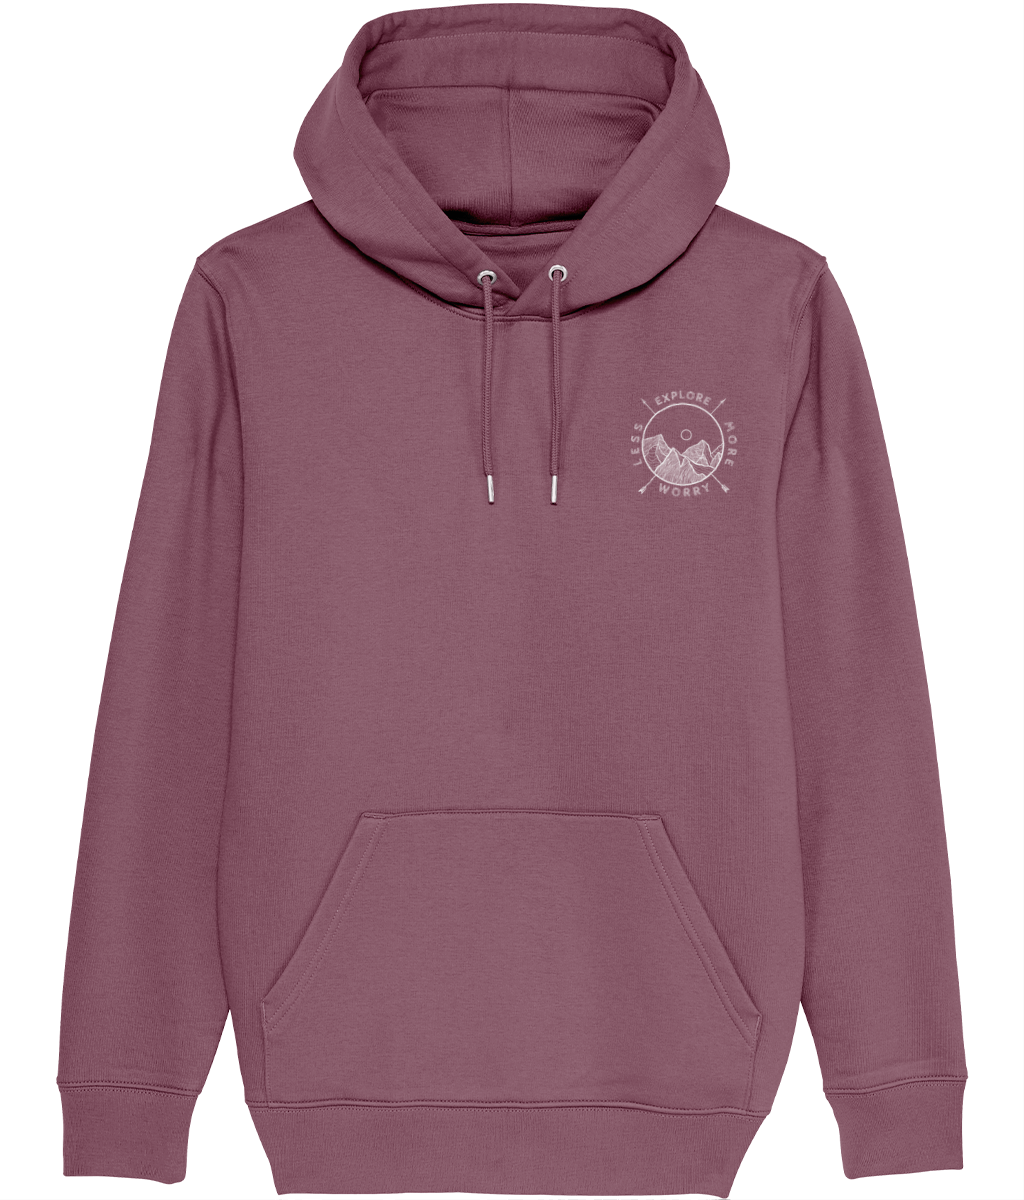 Explore More Worry Less Organic Cotton Hoodie